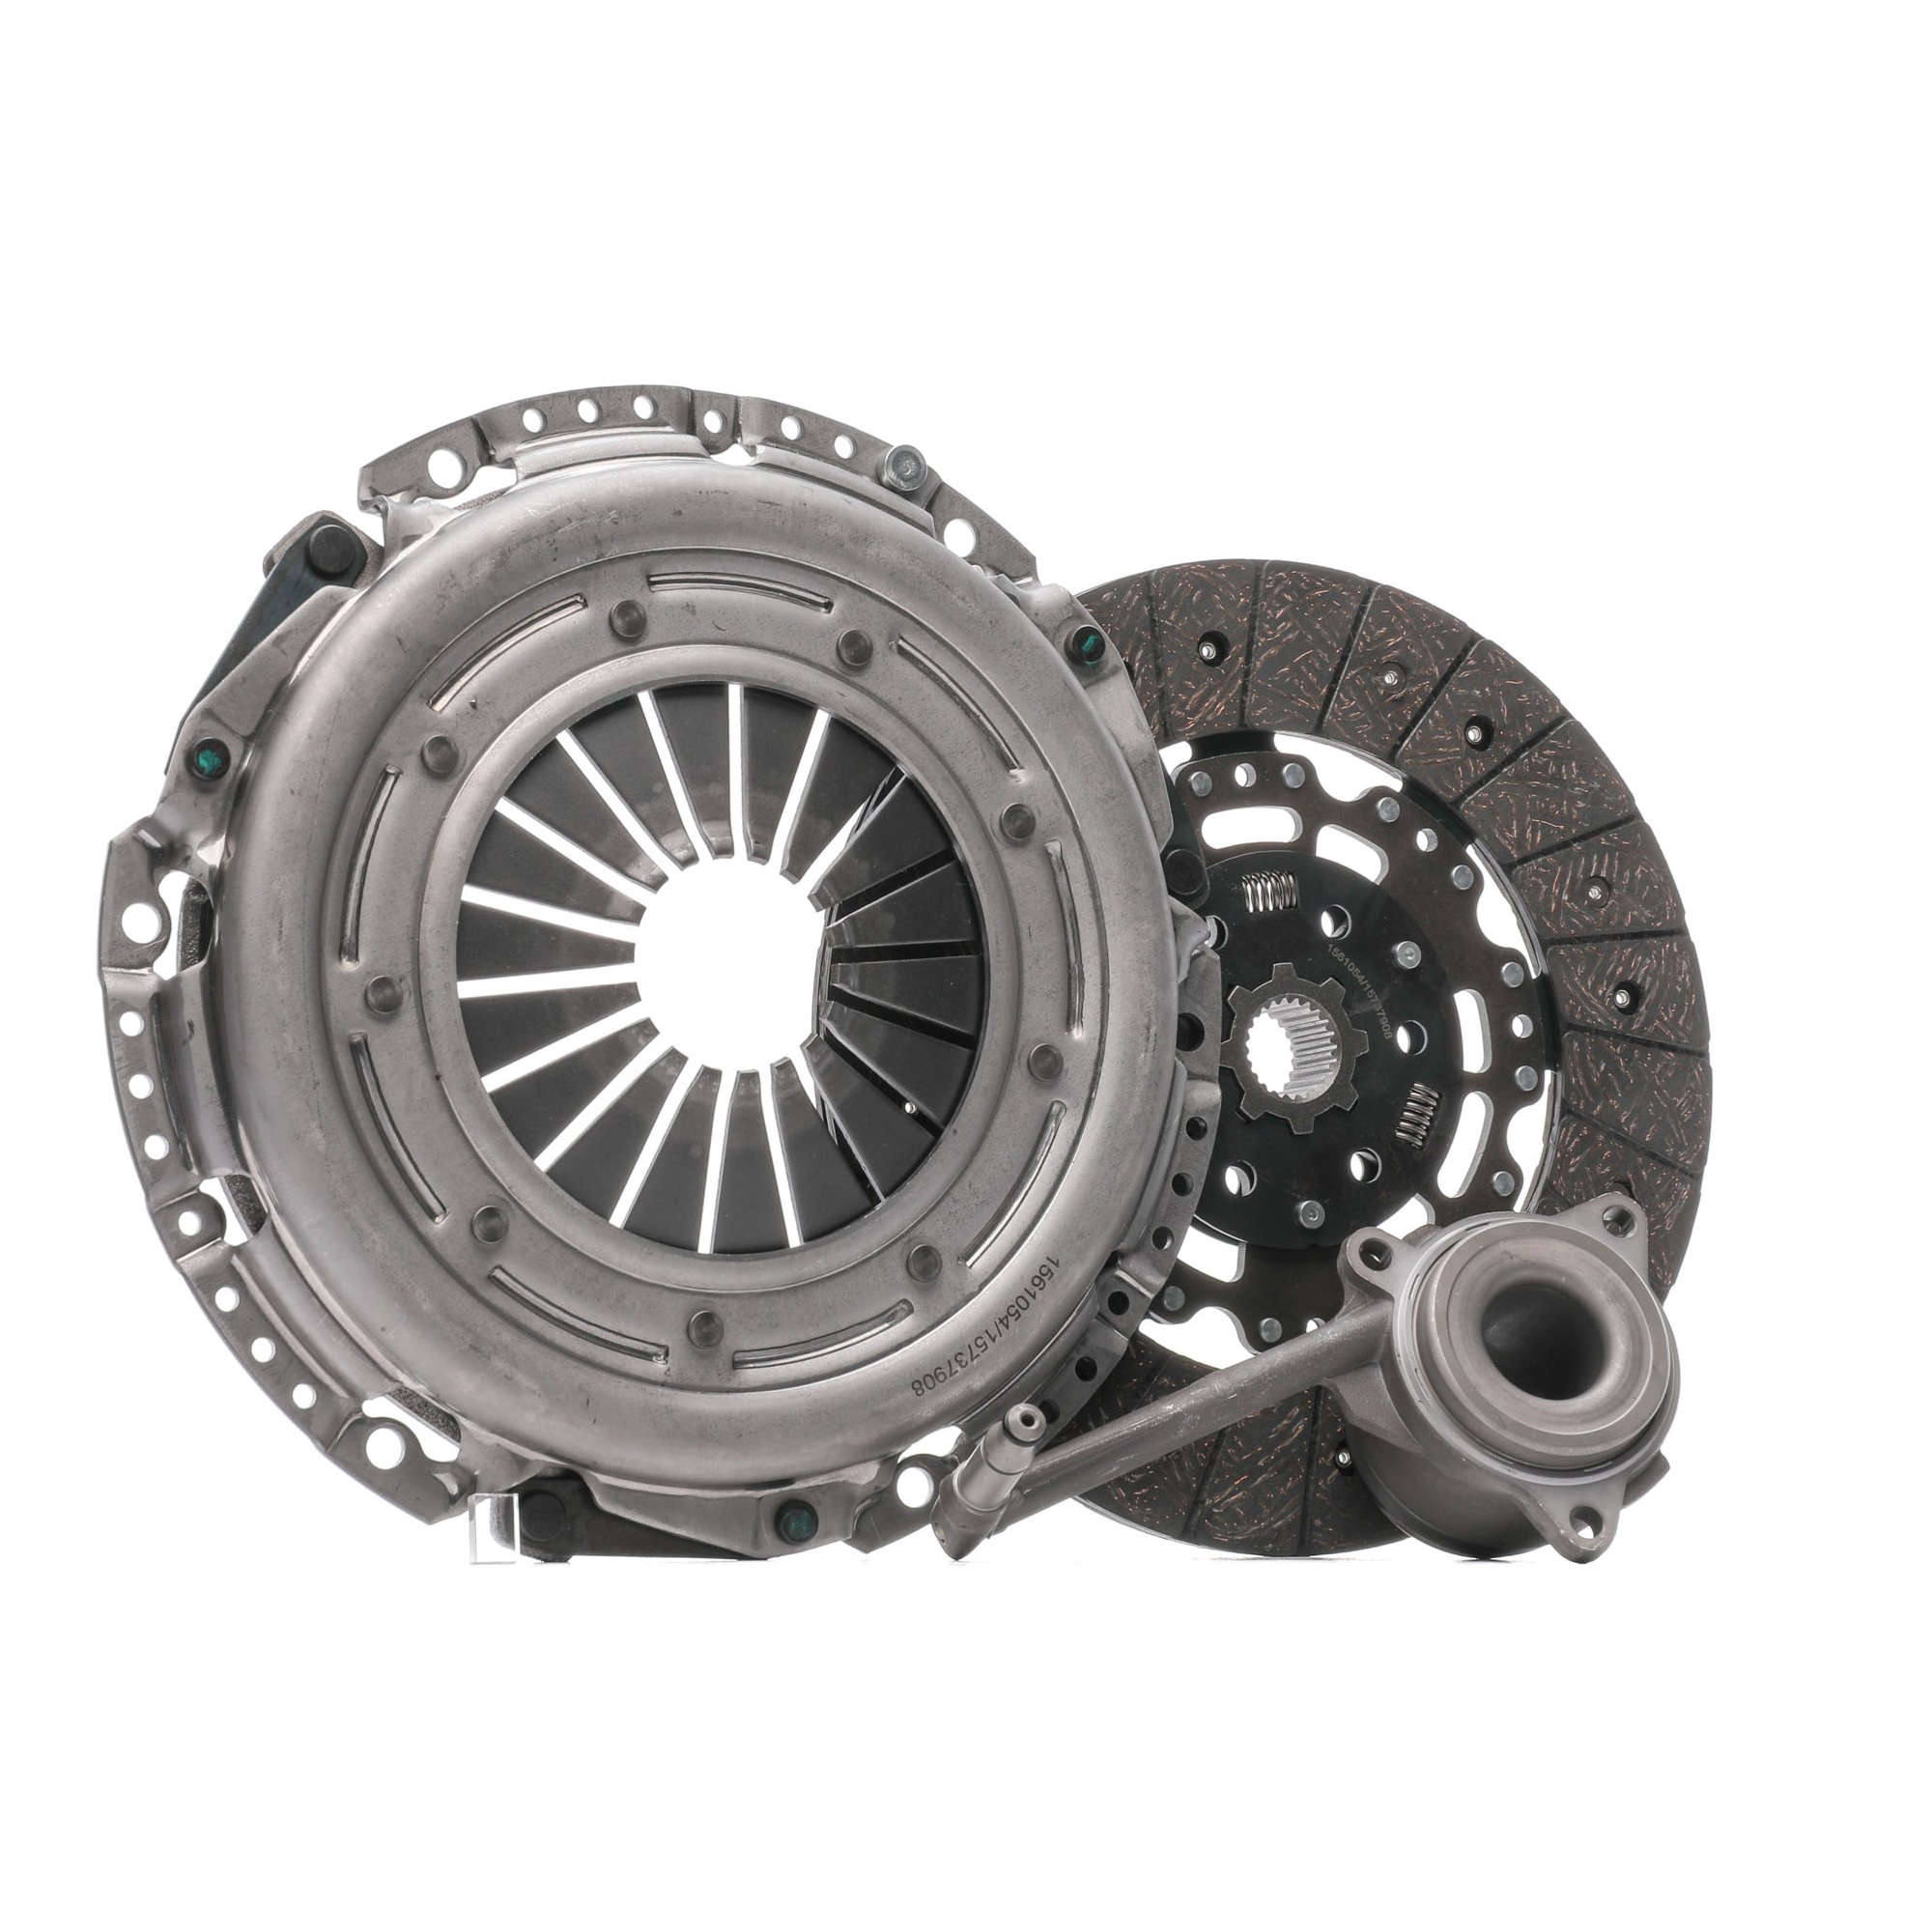 RIDEX 479C0801 Clutch kit three-piece, with central slave cylinder, with synthetic grease, 241mm